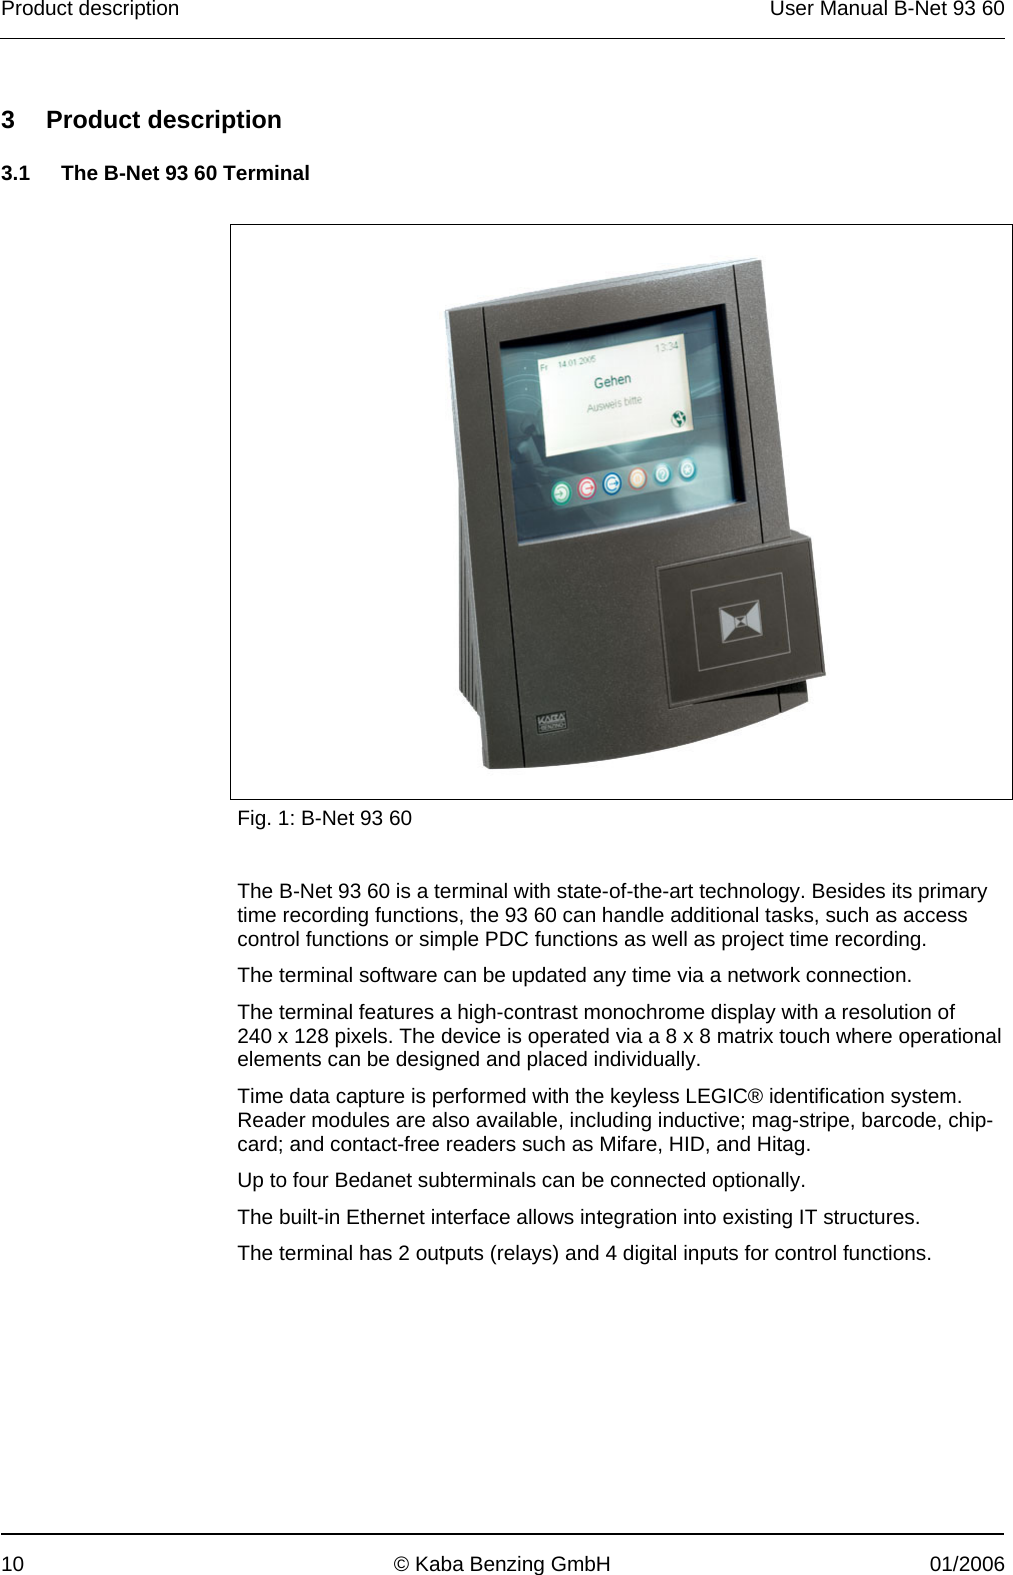 Product description  User Manual B-Net 93 60 10  © Kaba Benzing GmbH  01/2006   3 Product description  3.1  The B-Net 93 60 Terminal     Fig. 1: B-Net 93 60  The B-Net 93 60 is a terminal with state-of-the-art technology. Besides its primary time recording functions, the 93 60 can handle additional tasks, such as access control functions or simple PDC functions as well as project time recording. The terminal software can be updated any time via a network connection. The terminal features a high-contrast monochrome display with a resolution of 240 x 128 pixels. The device is operated via a 8 x 8 matrix touch where operational elements can be designed and placed individually. Time data capture is performed with the keyless LEGIC® identification system. Reader modules are also available, including inductive; mag-stripe, barcode, chip-card; and contact-free readers such as Mifare, HID, and Hitag. Up to four Bedanet subterminals can be connected optionally. The built-in Ethernet interface allows integration into existing IT structures. The terminal has 2 outputs (relays) and 4 digital inputs for control functions. 